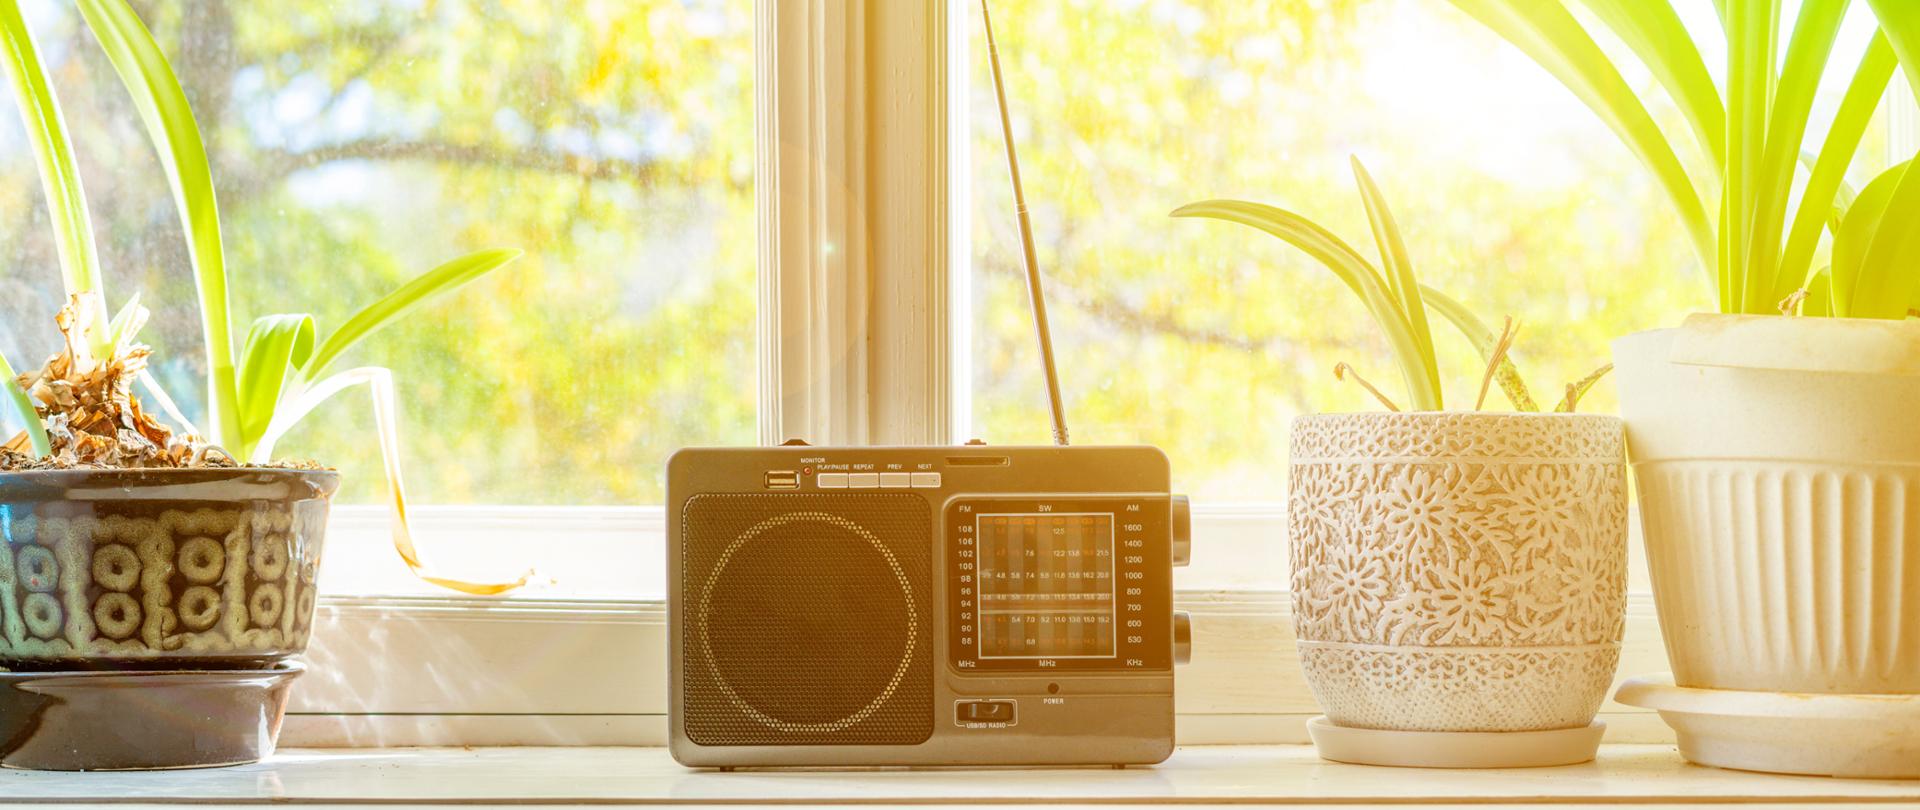 old retro radio with antenna on the window at home playing music